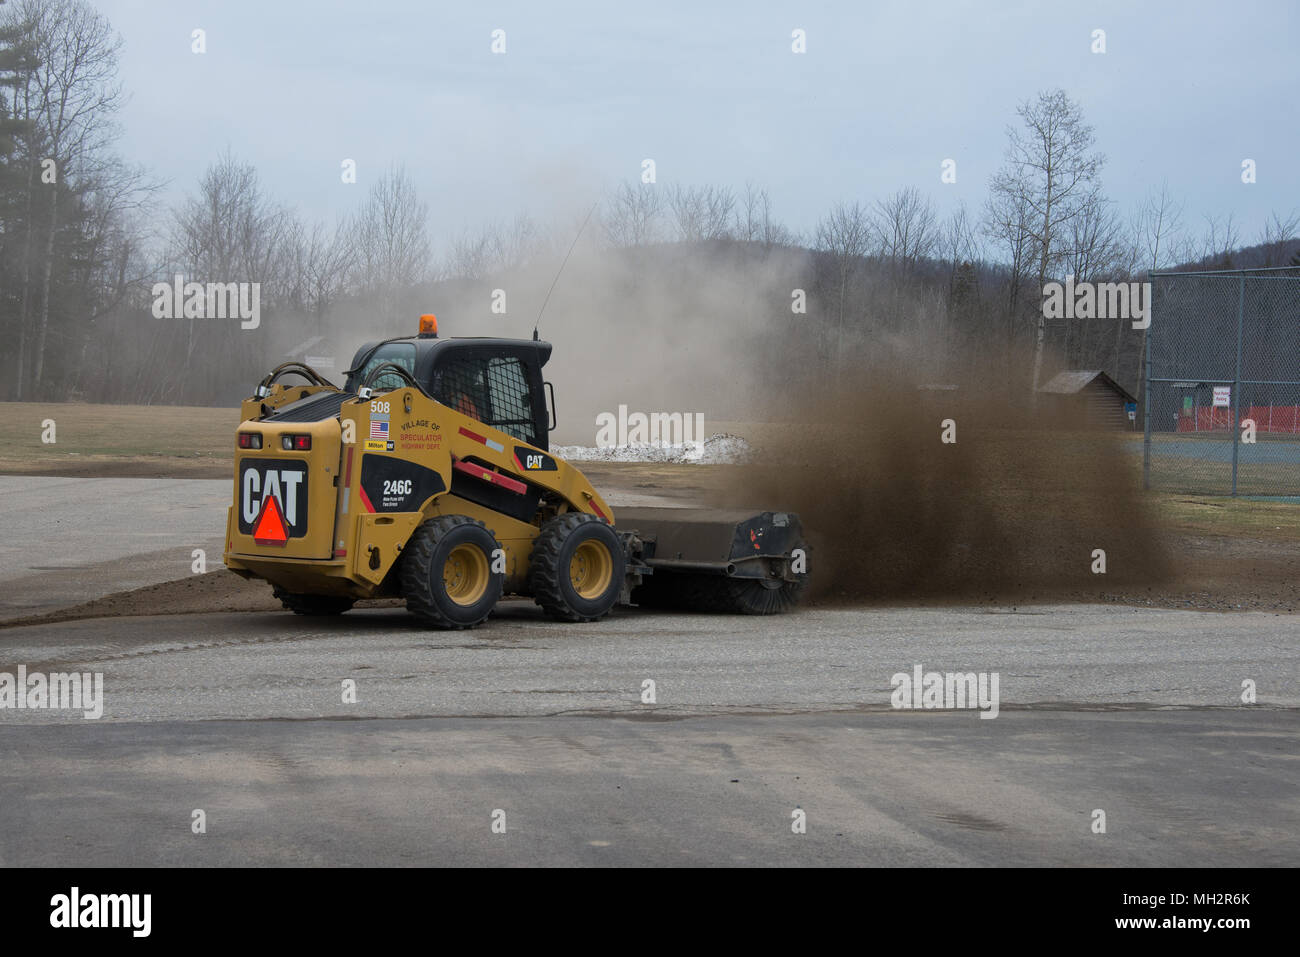 A Caterpillar 246C with a rotary brush sweeping the winters sand and gravel off a parking lot in Speculator, NY USA Stock Photo